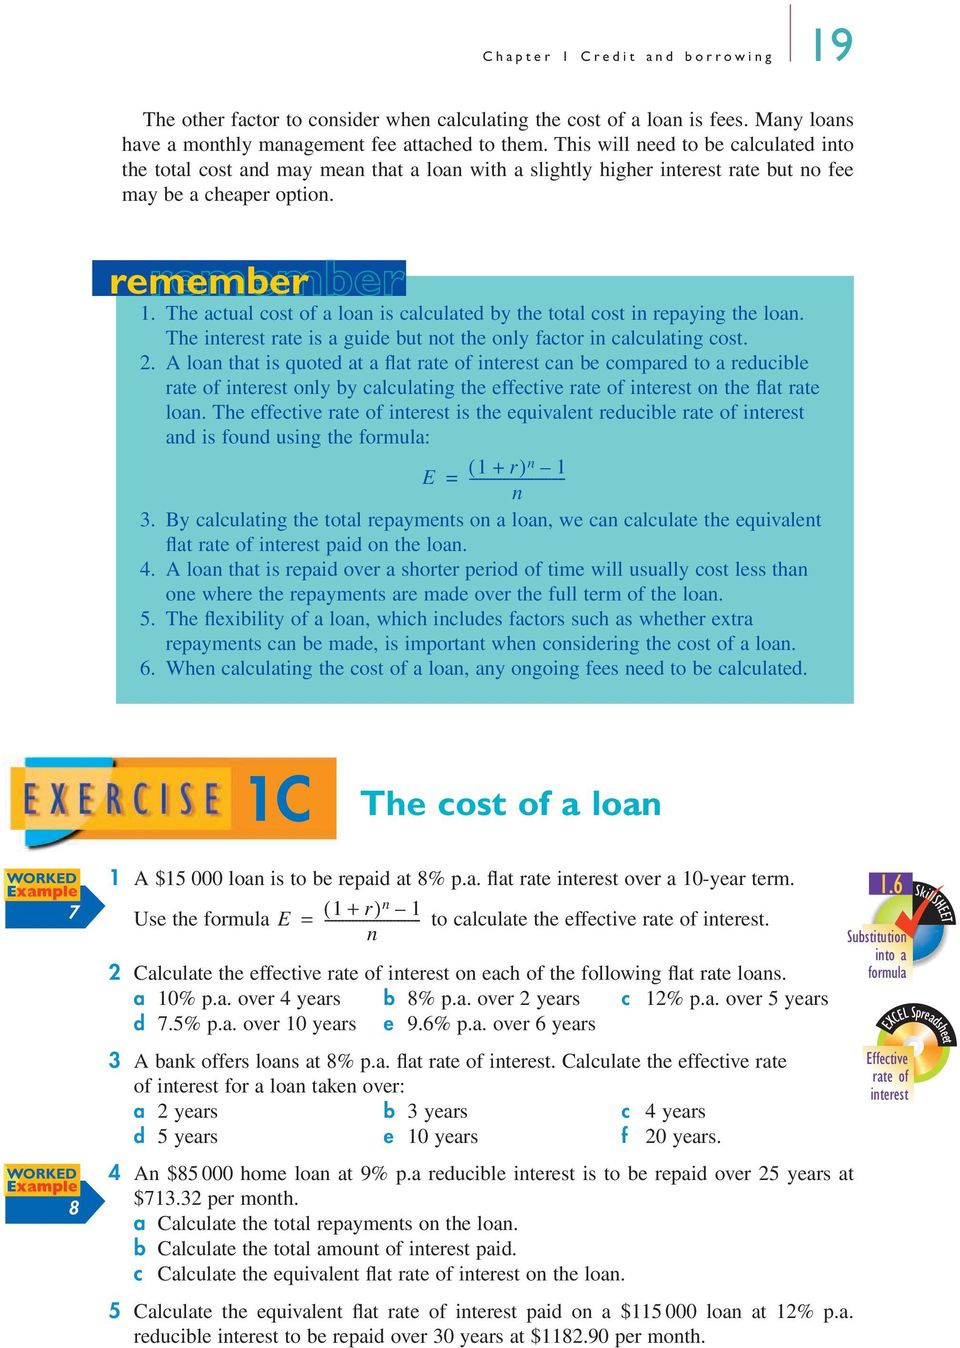 The actual cost of a loan is calculated by the total cost in repaying the loan. The interest rate is a guide but not the only factor in calculating cost.